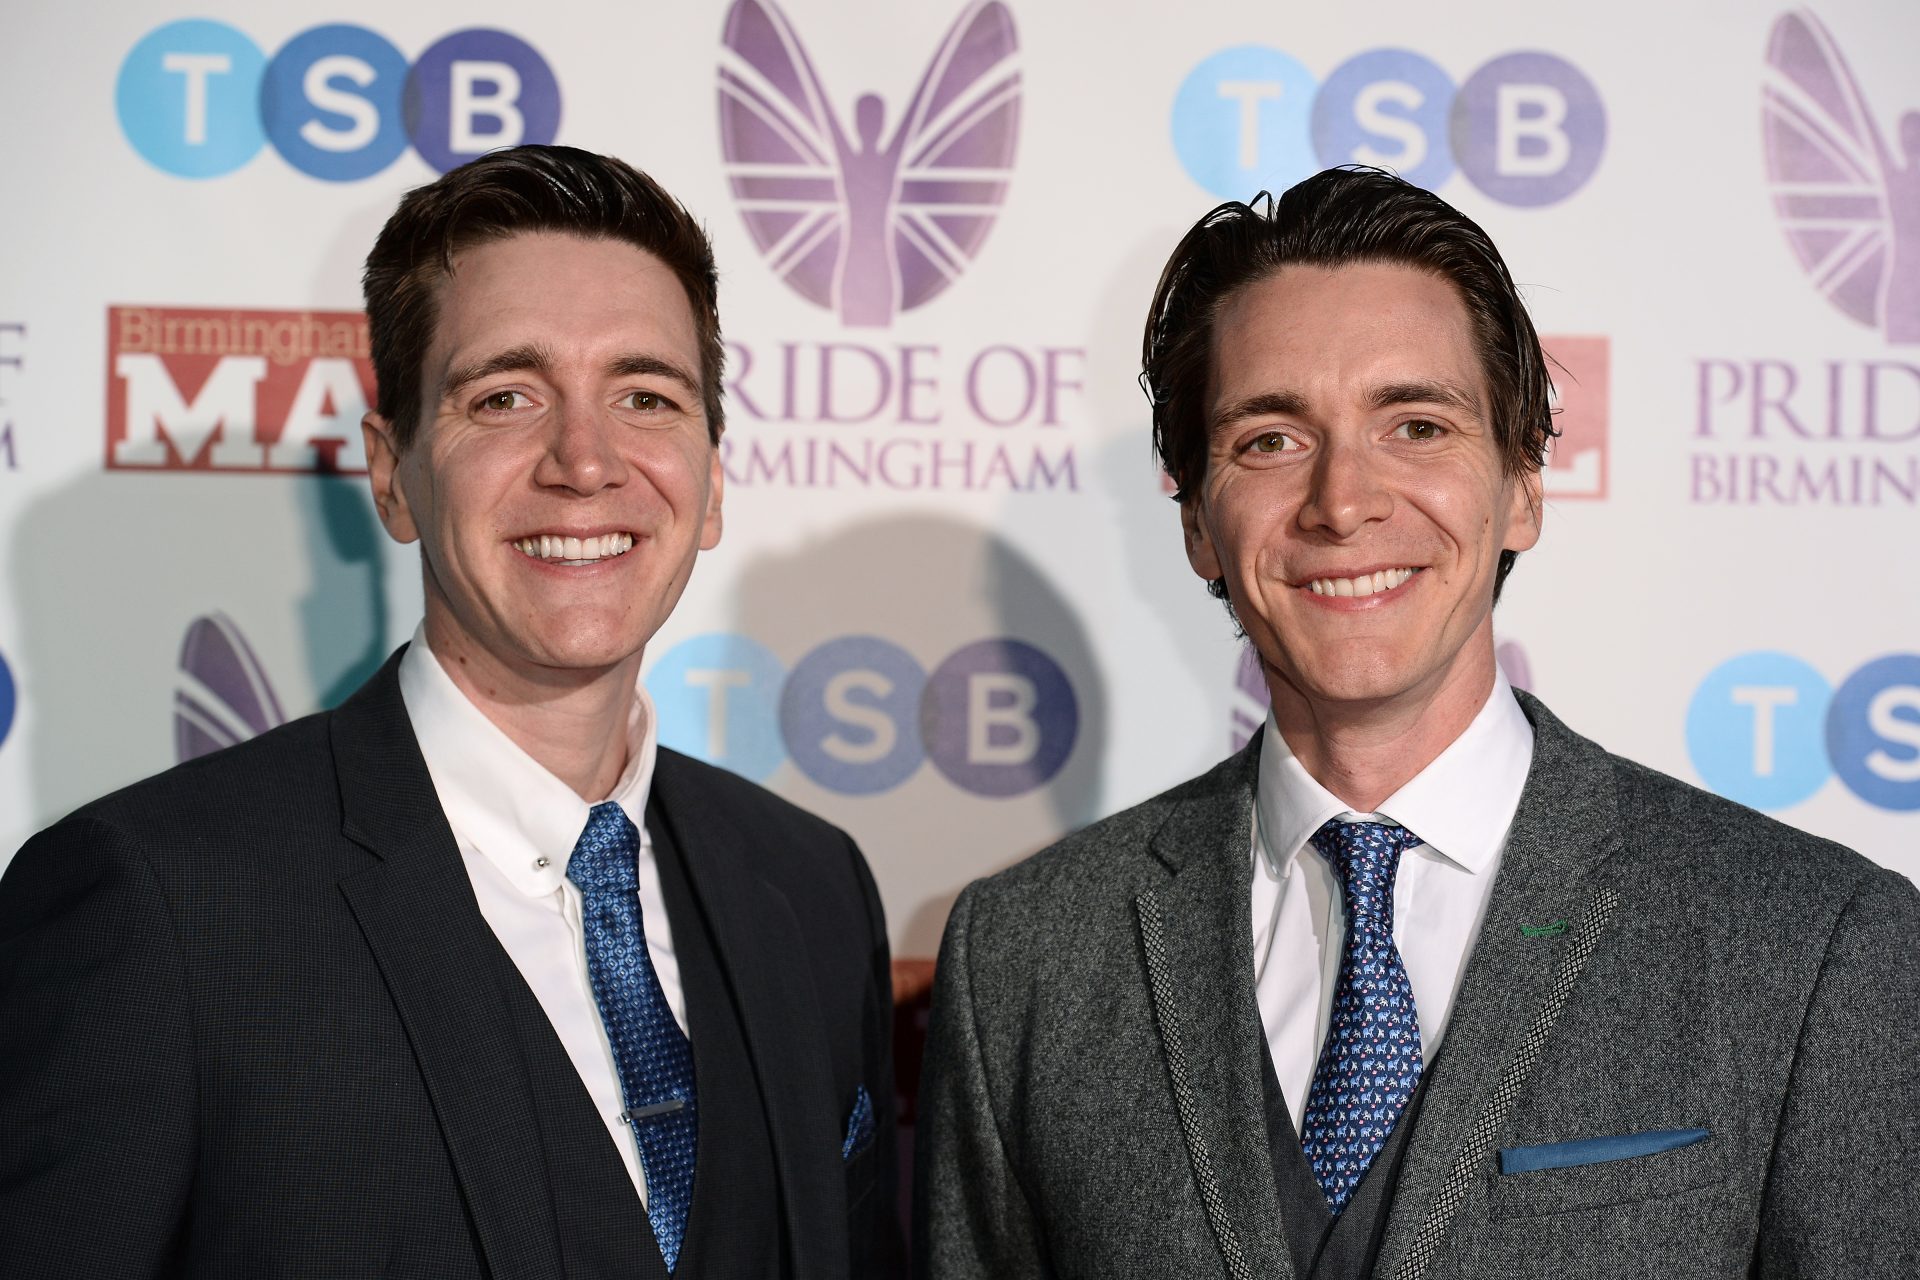 James & Oliver Phelps now